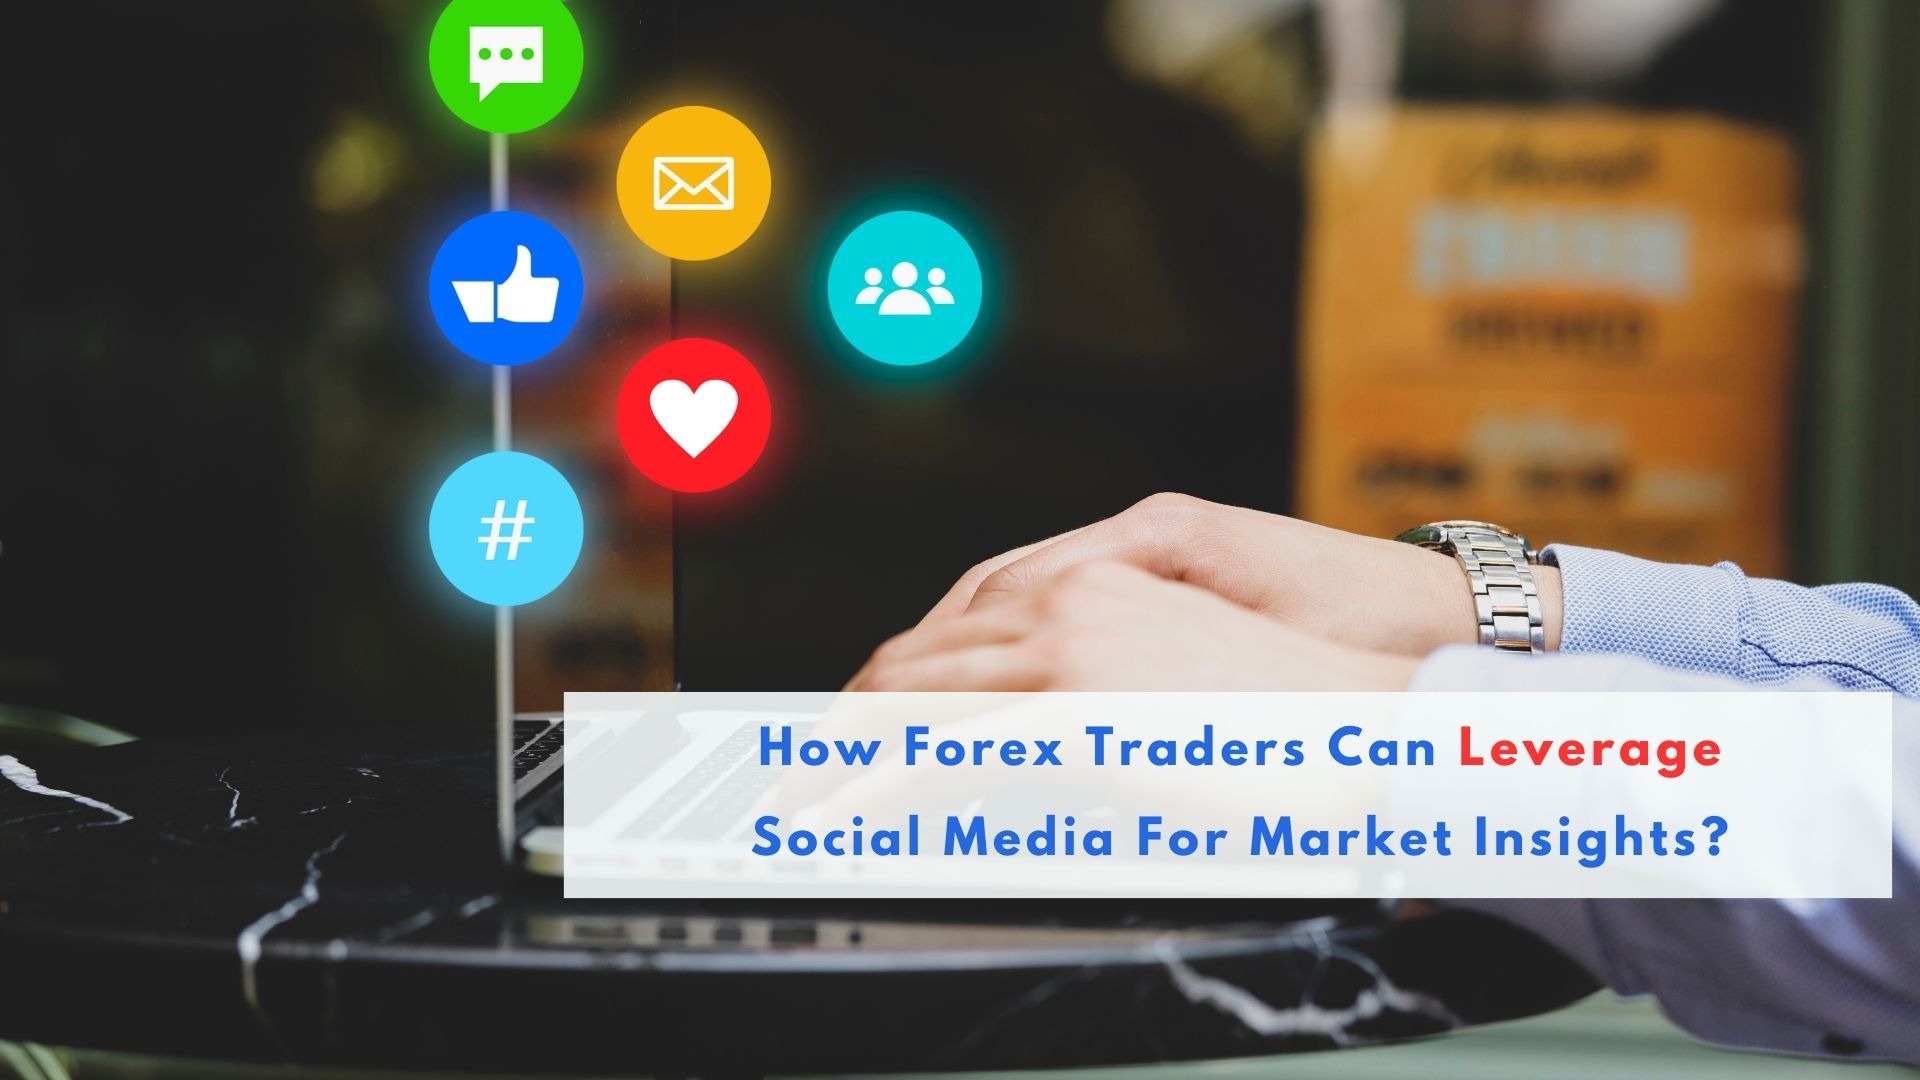 How Forex Traders Can Leverage Social Media For Market Insights?